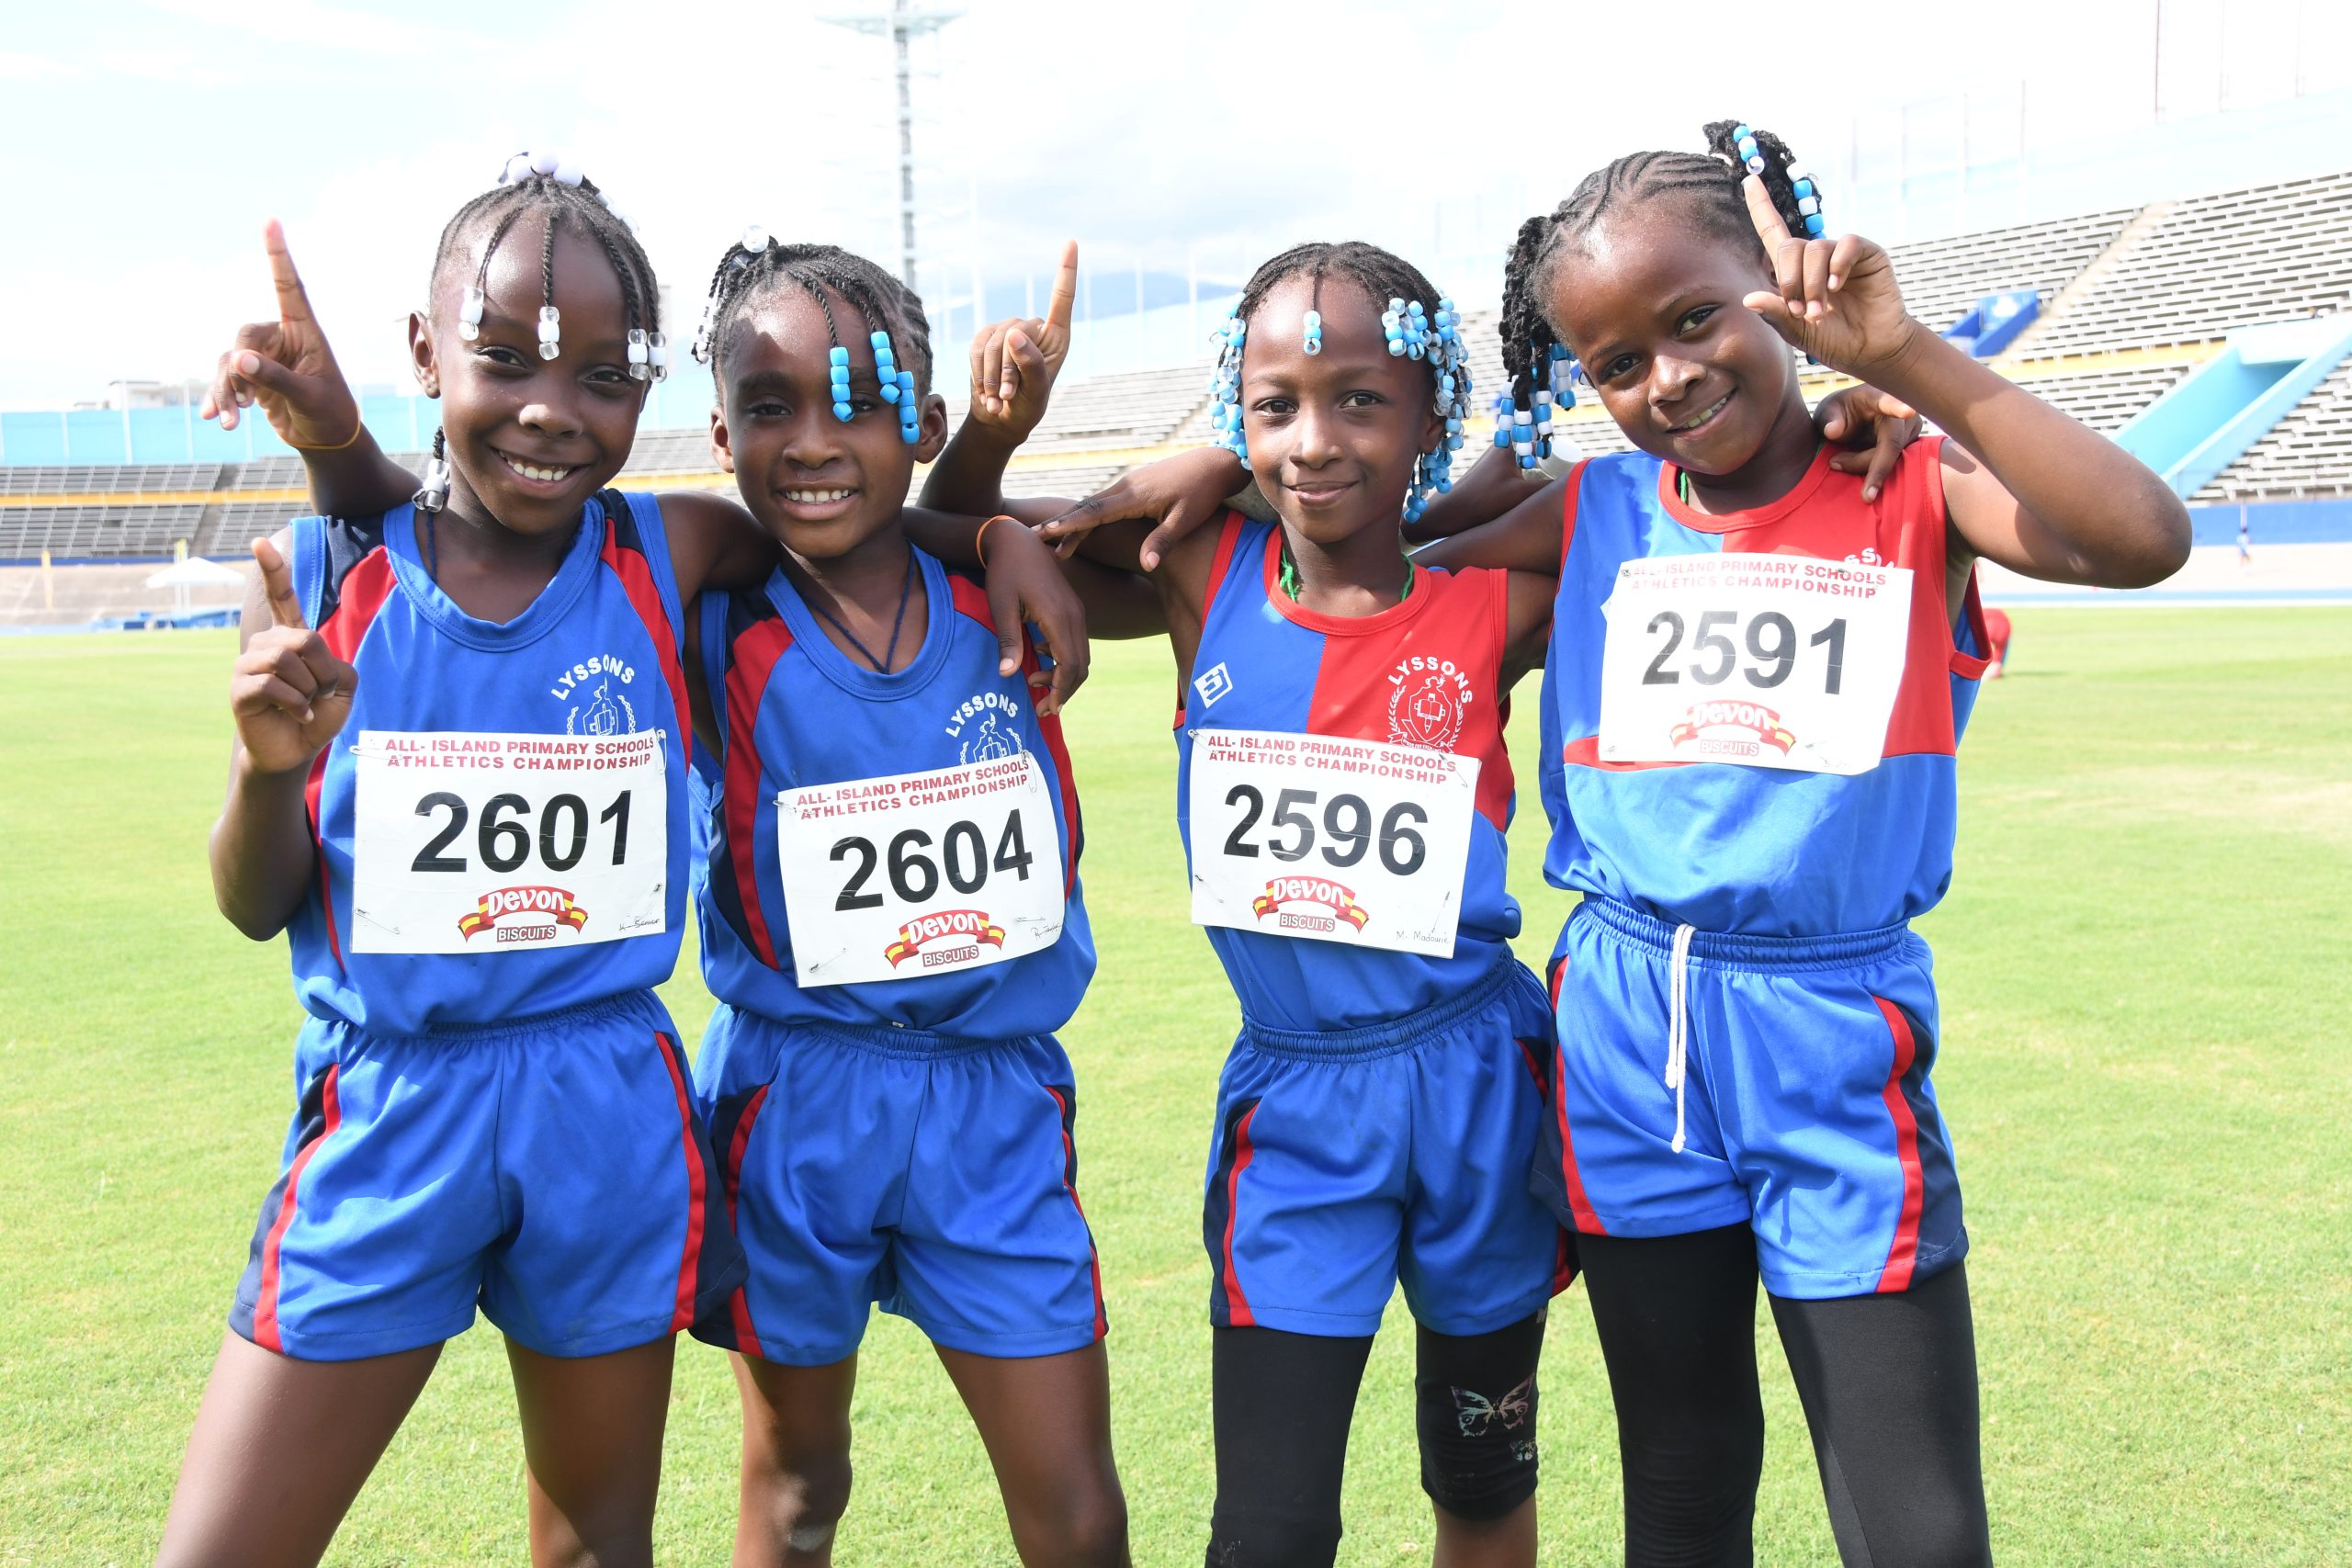 Lyssons captured the girls 6-8 4x100 relay in an impressive 1:00.79 and they posed for the cameras from left: Kathalia Roberts, Angelika Spike, Melanie Madourie and Demoya Deans.